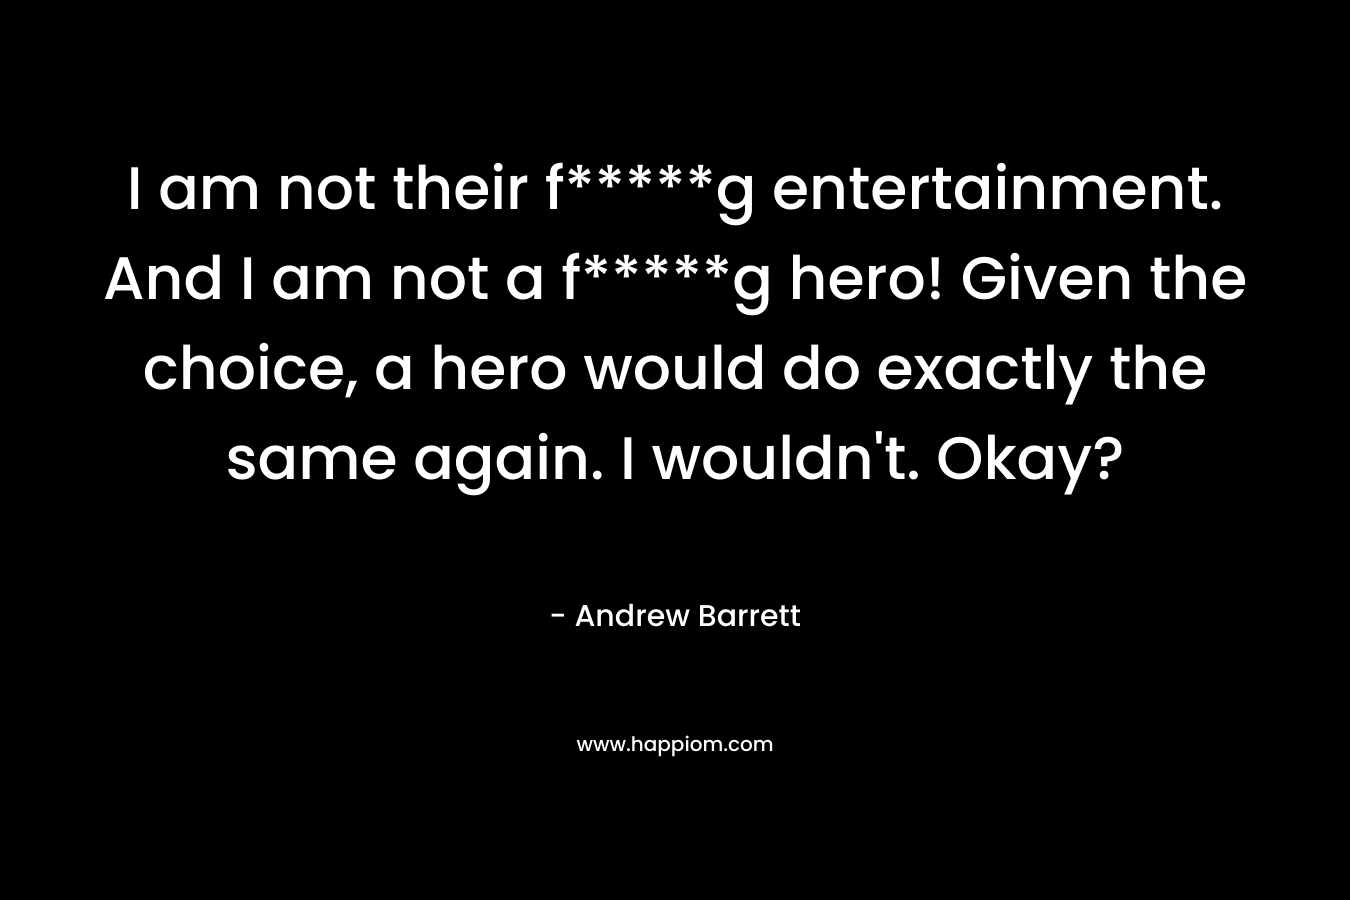 I am not their f*****g entertainment. And I am not a f*****g hero! Given the choice, a hero would do exactly the same again. I wouldn't. Okay?